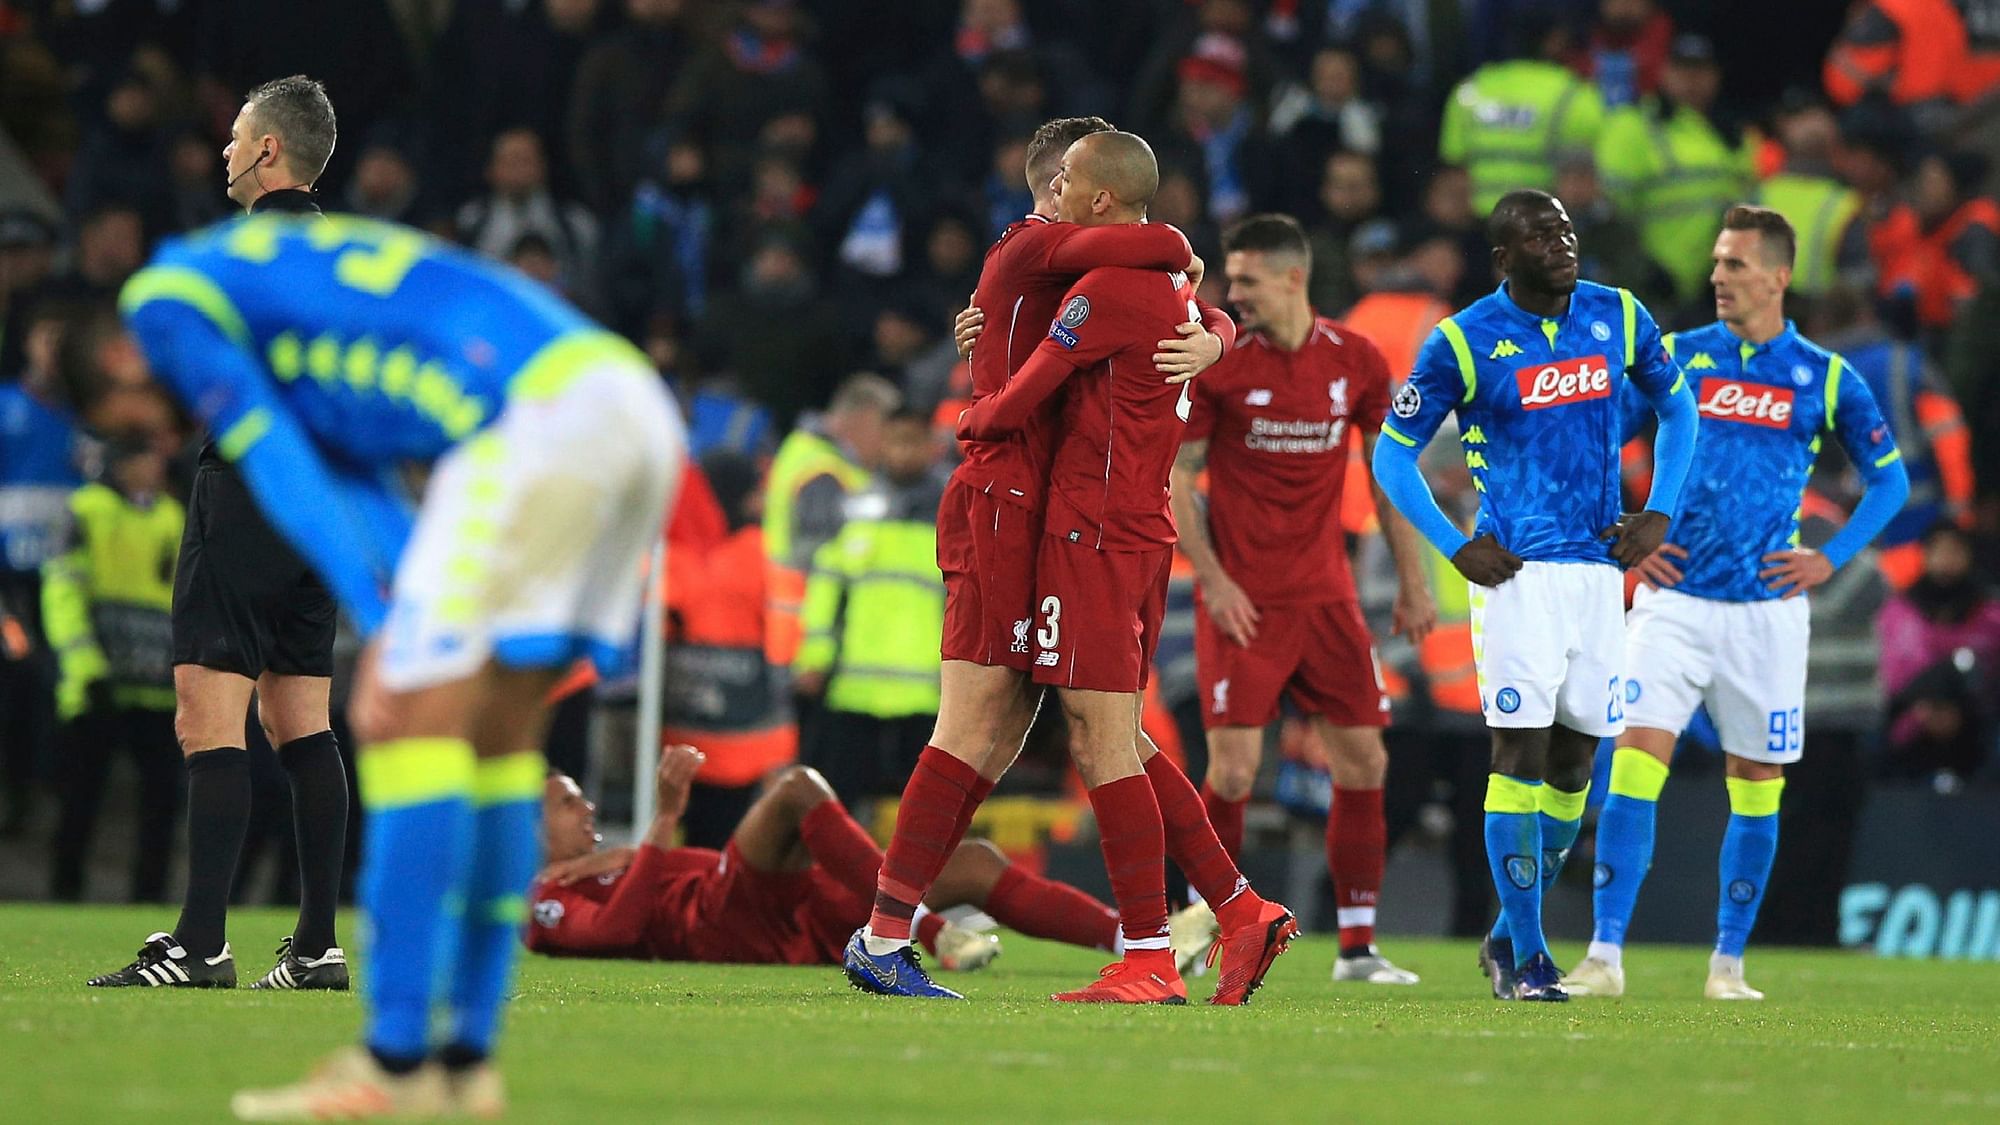 Liverpool secured knockout qualification in the UEFA Champions League with a 1-0 victory over Napoli at Anfield.